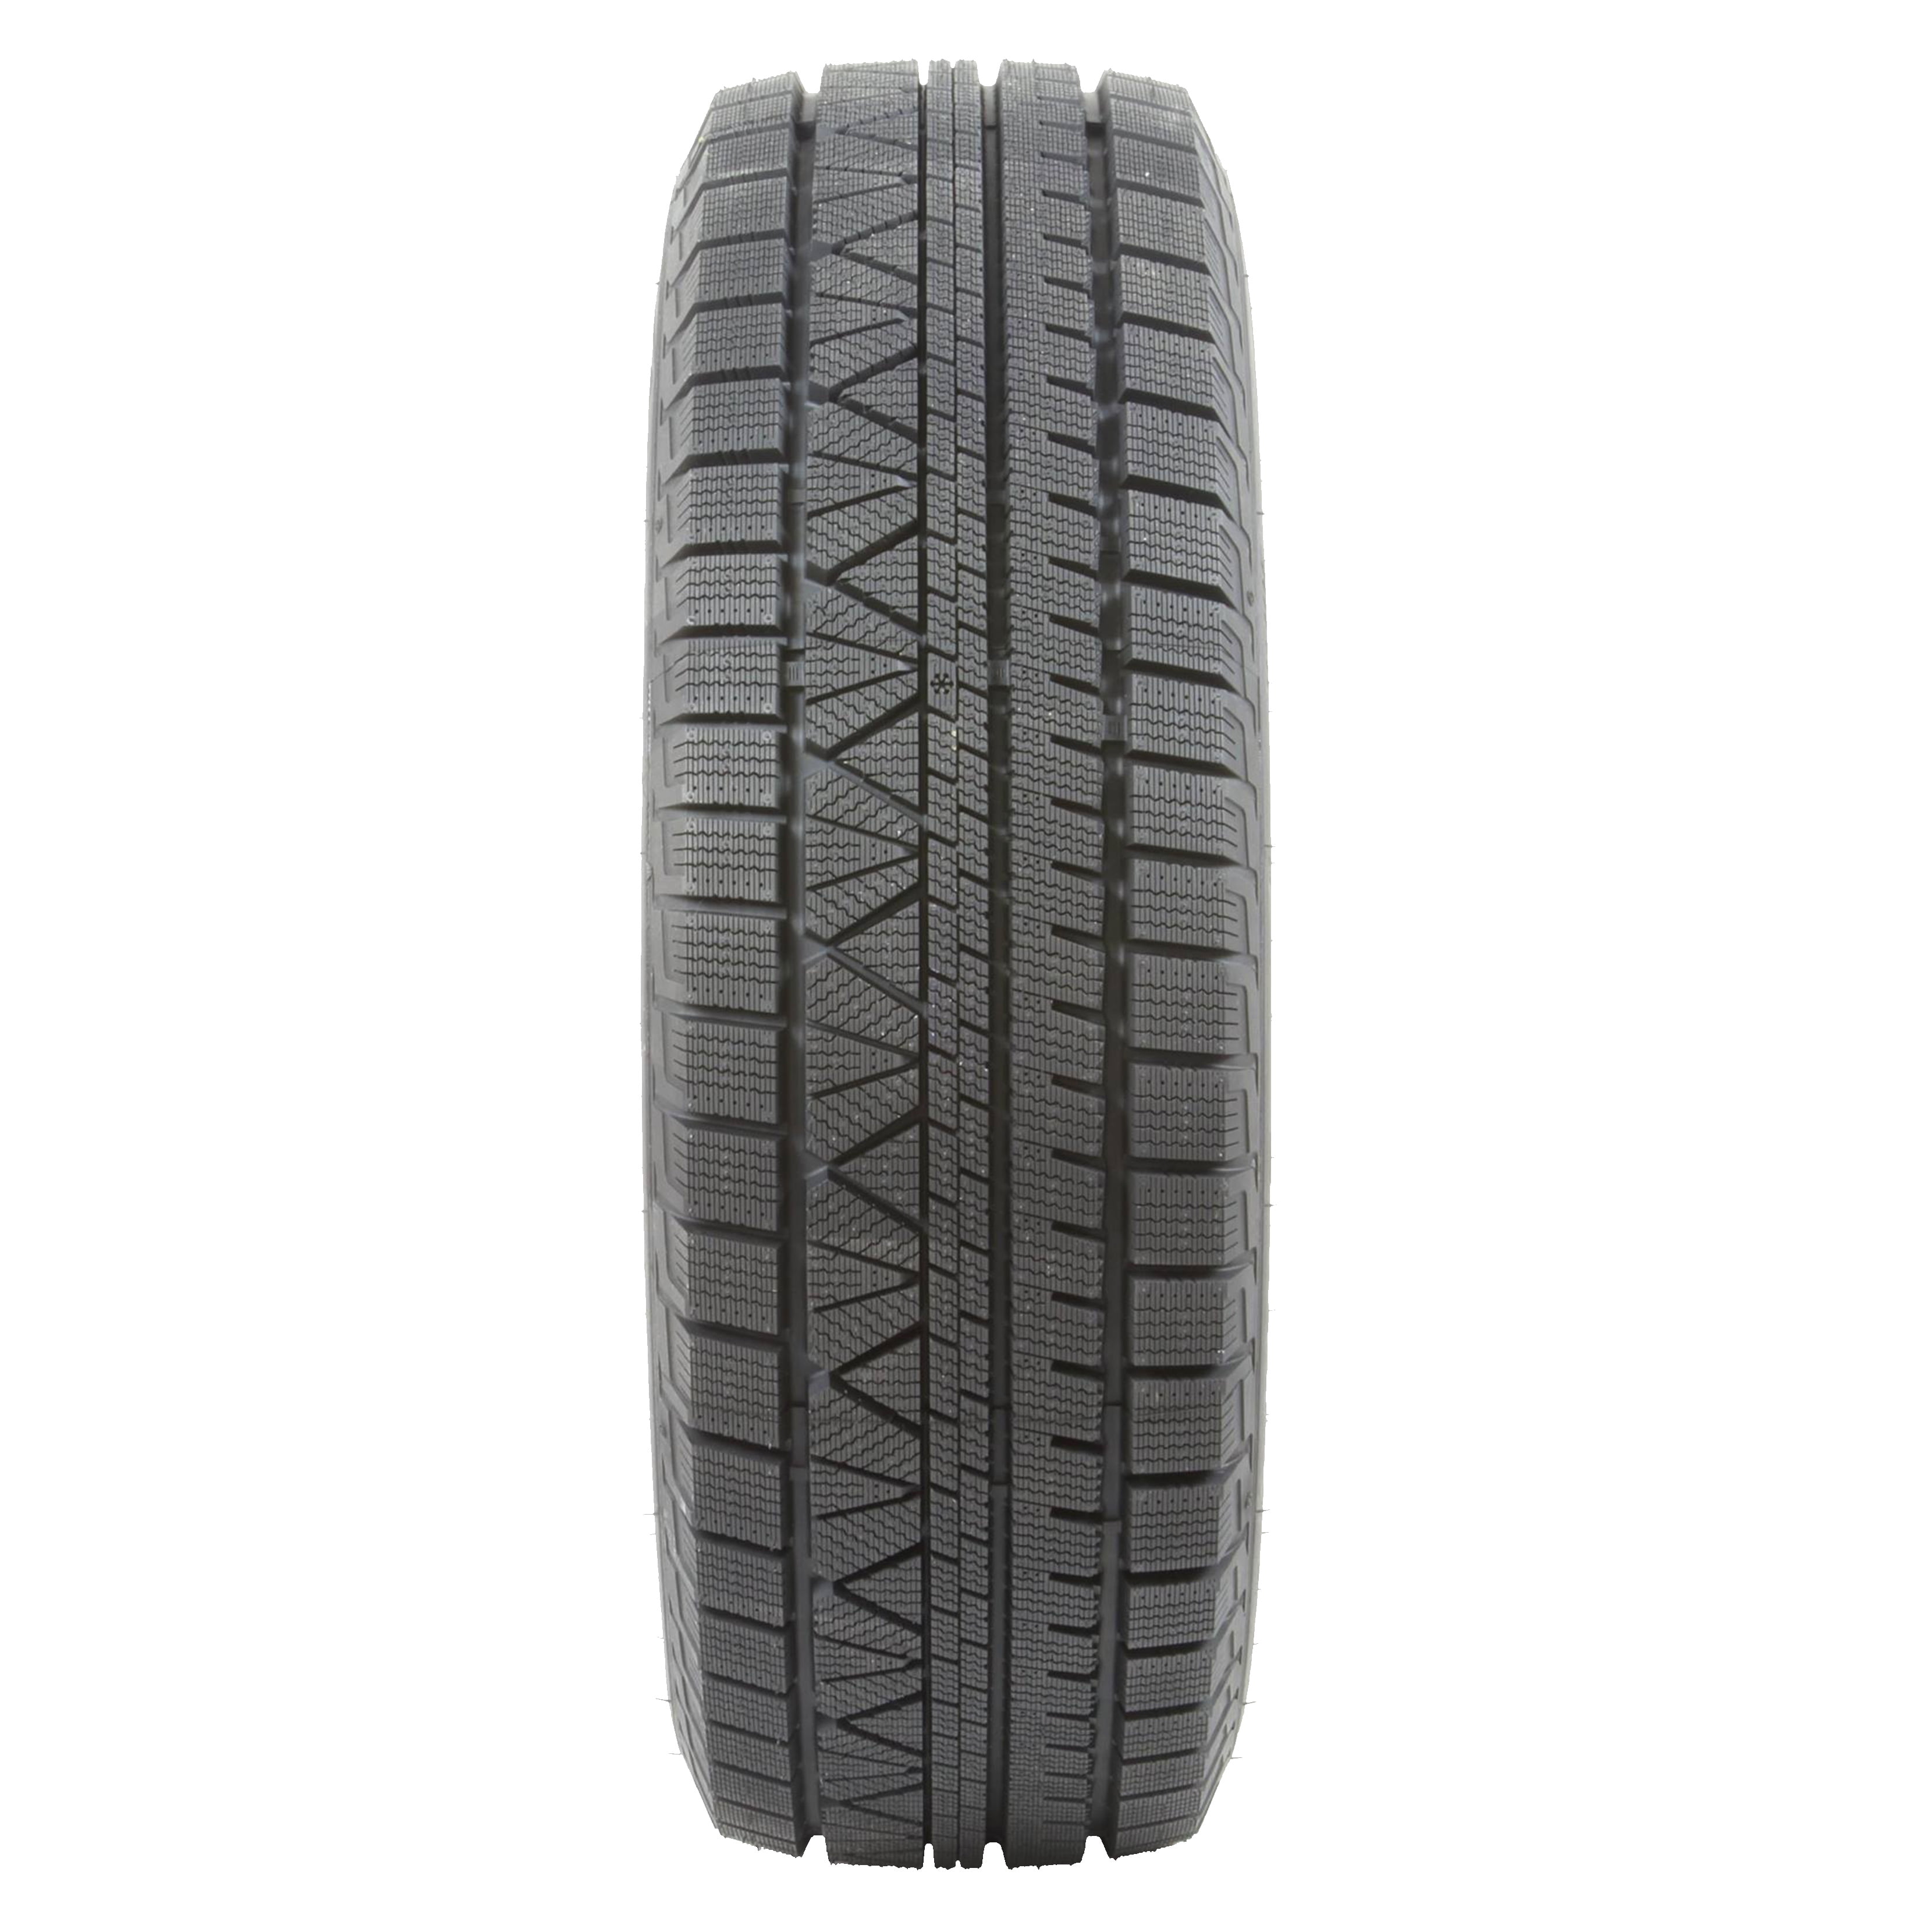 Vitour ICE LINE Studless-Winter Radial Tire 225/55R16 95T 